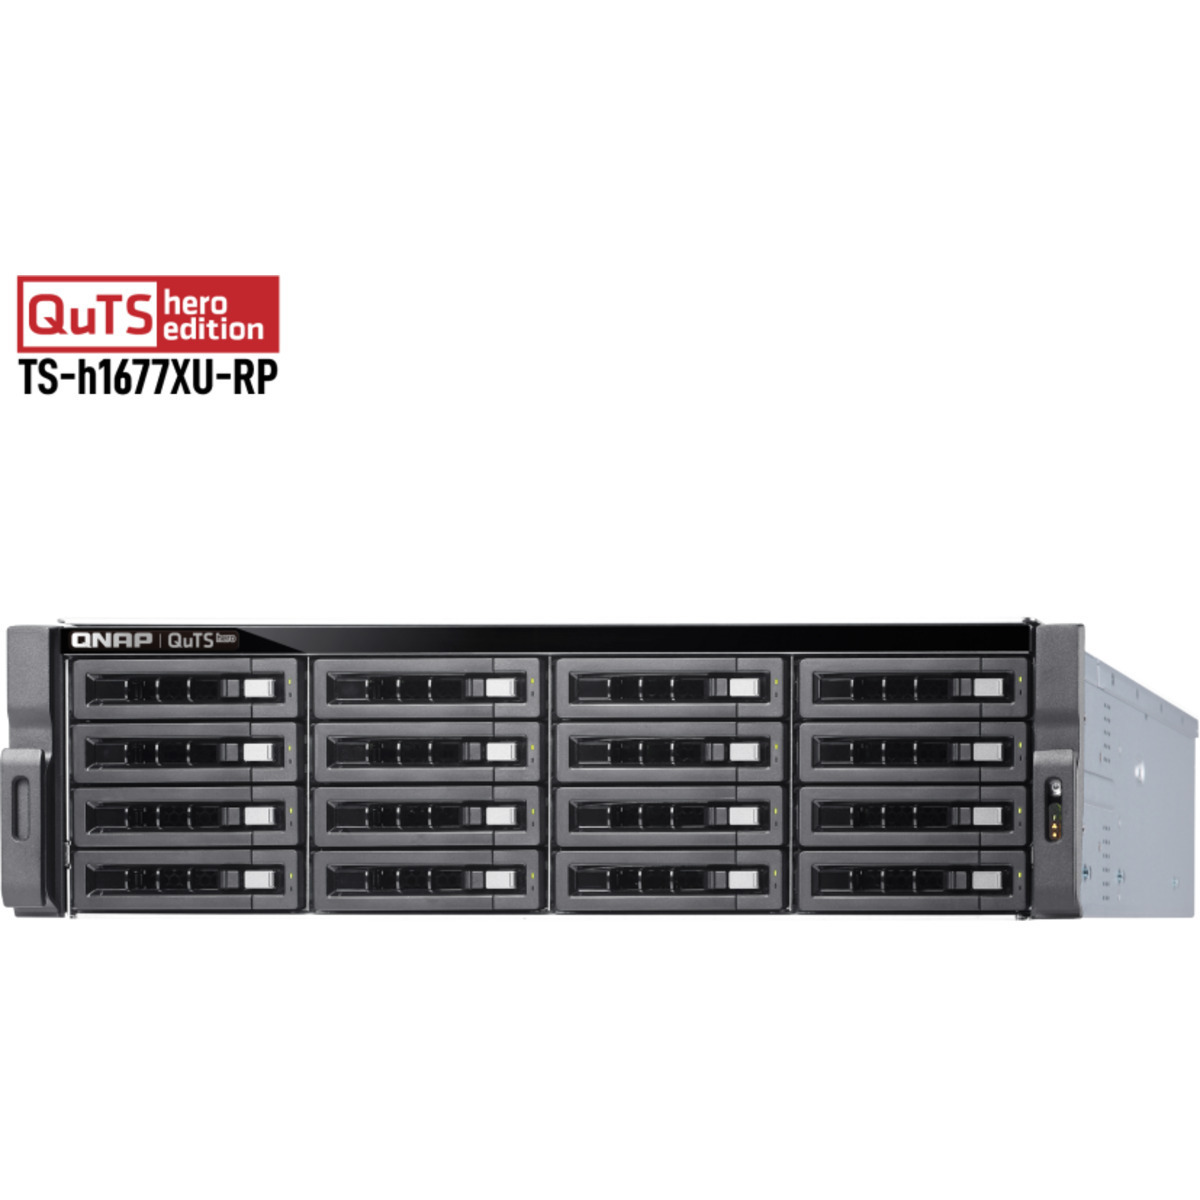 buy QNAP TS-h1677XU-RP QuTS hero Edition 320tb RackMount NAS - Network Attached Storage Device 16x20000gb Seagate EXOS X20 ST20000NM007D 3.5 7200rpm SATA 6Gb/s HDD ENTERPRISE Class Drives Installed - Burn-In Tested - nas headquarters buy network attached storage server device das new raid-5 free shipping usa spring sale TS-h1677XU-RP QuTS hero Edition